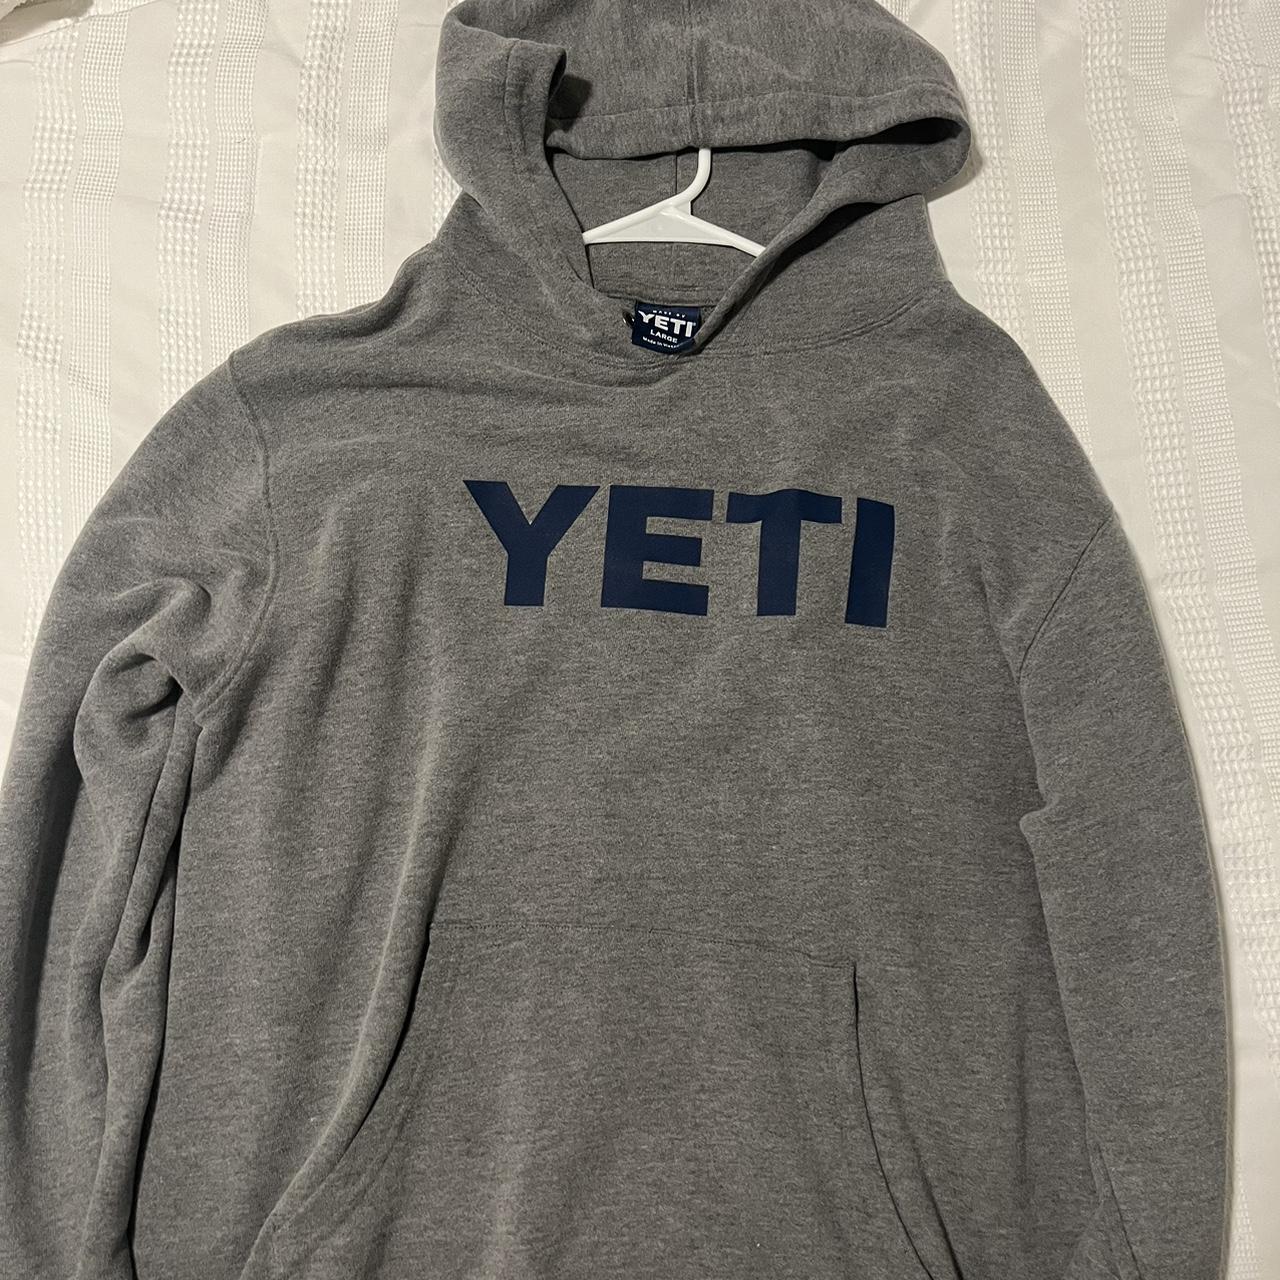 YETI hoodie Does not have the drawstring but still... - Depop